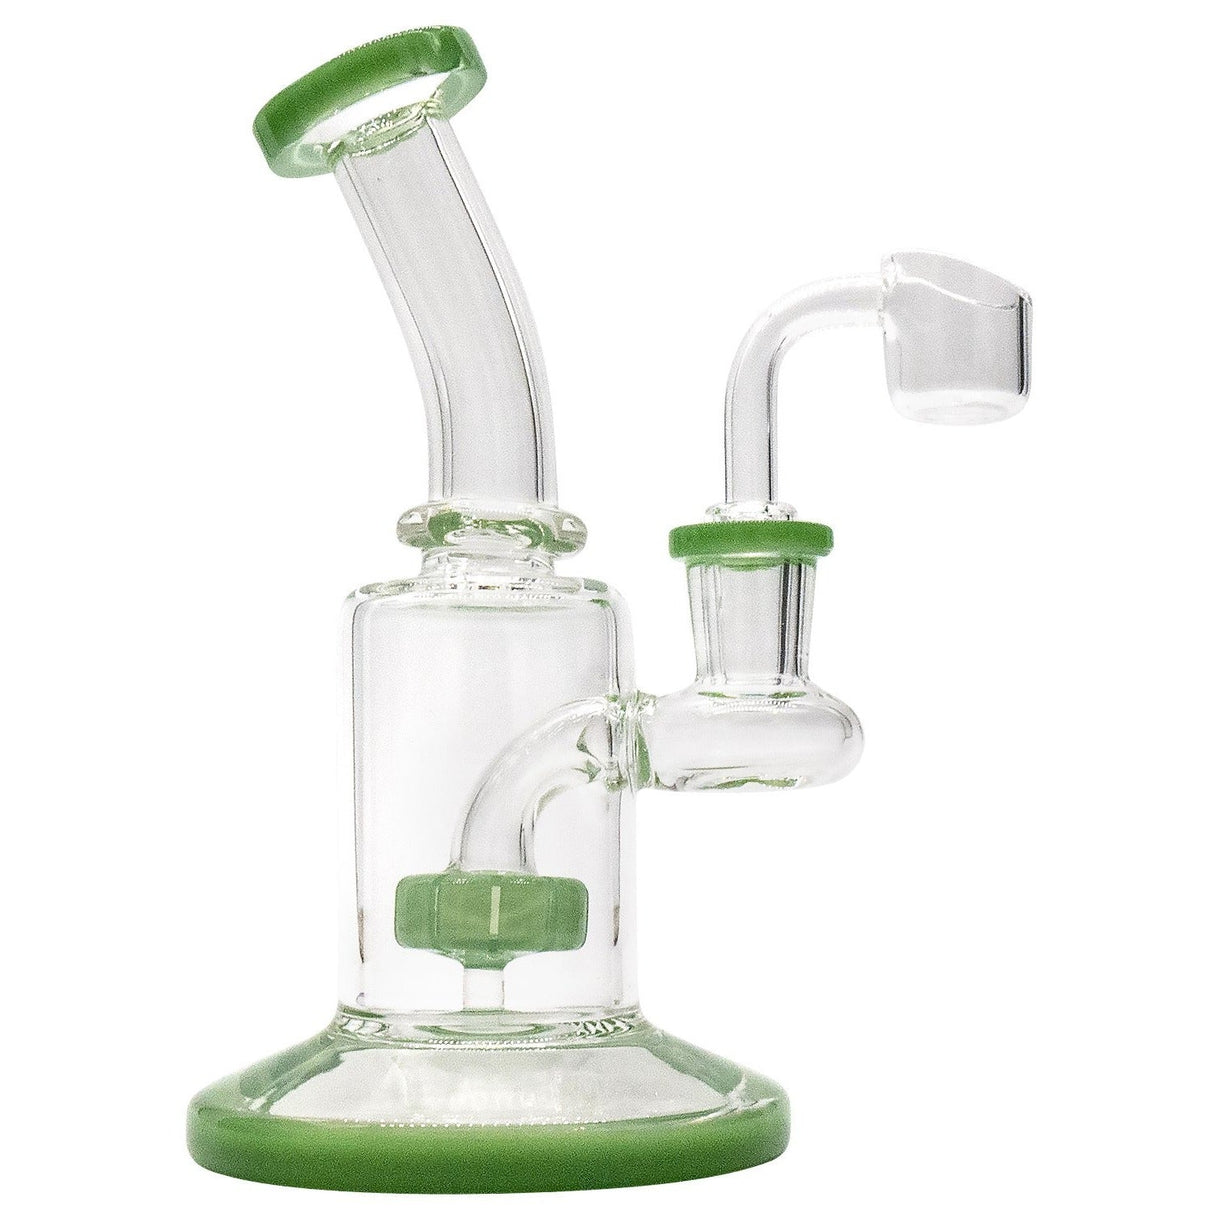 Glassic's 'Spritz' 6.5" Dab Rig with Green Shower-head Perc, 90 Degree Joint, Front View